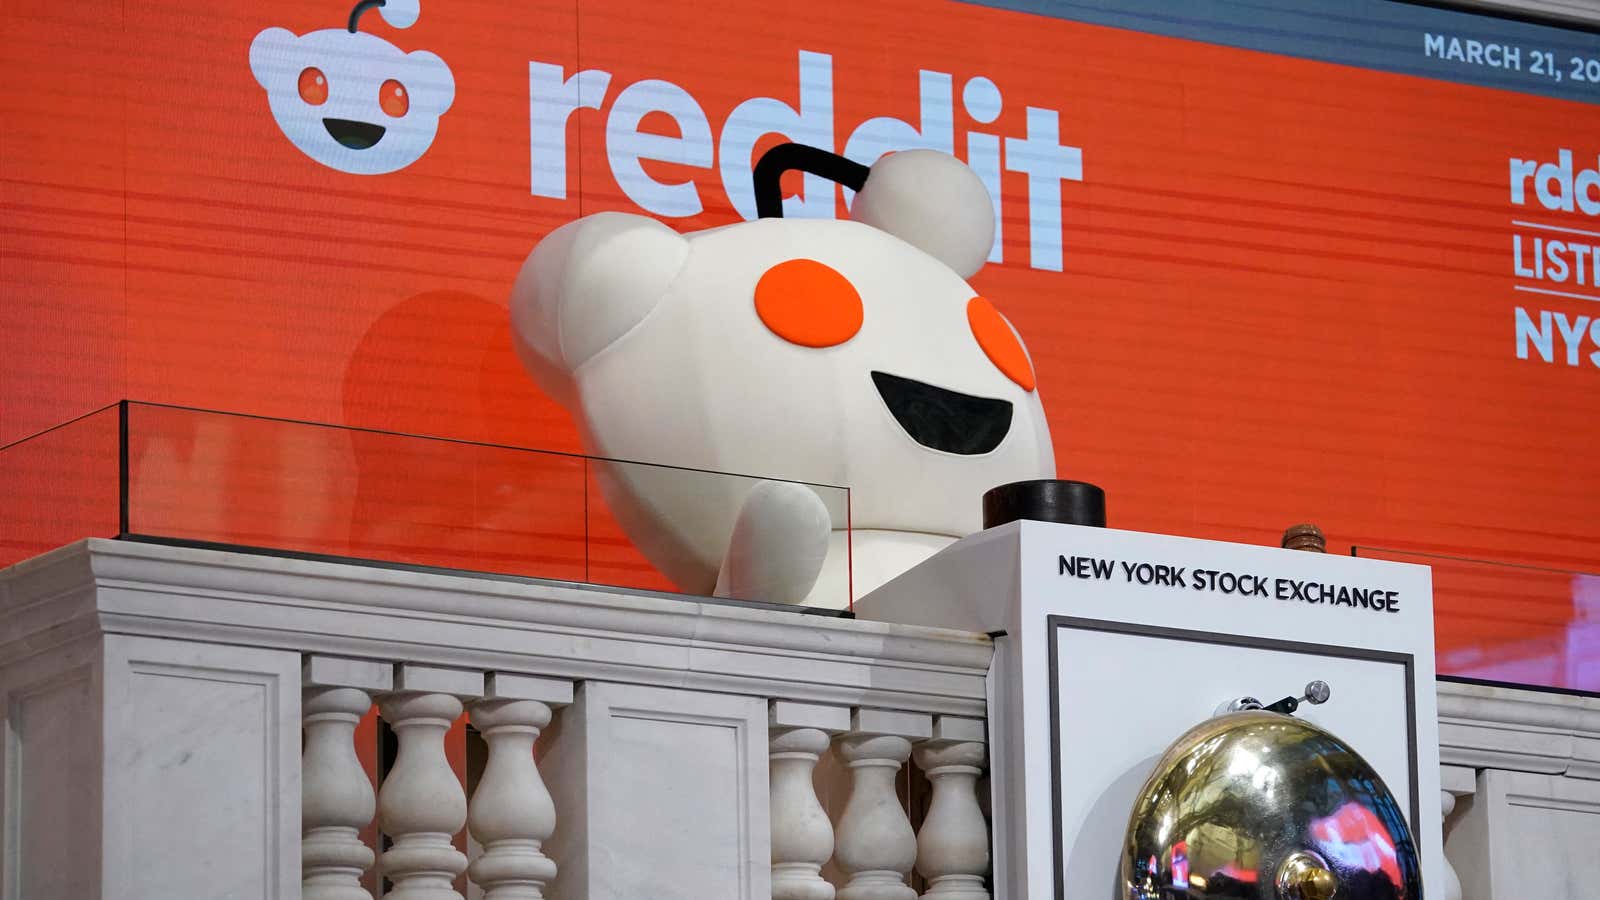 Image for Reddit's first earnings after going public made its stock jump